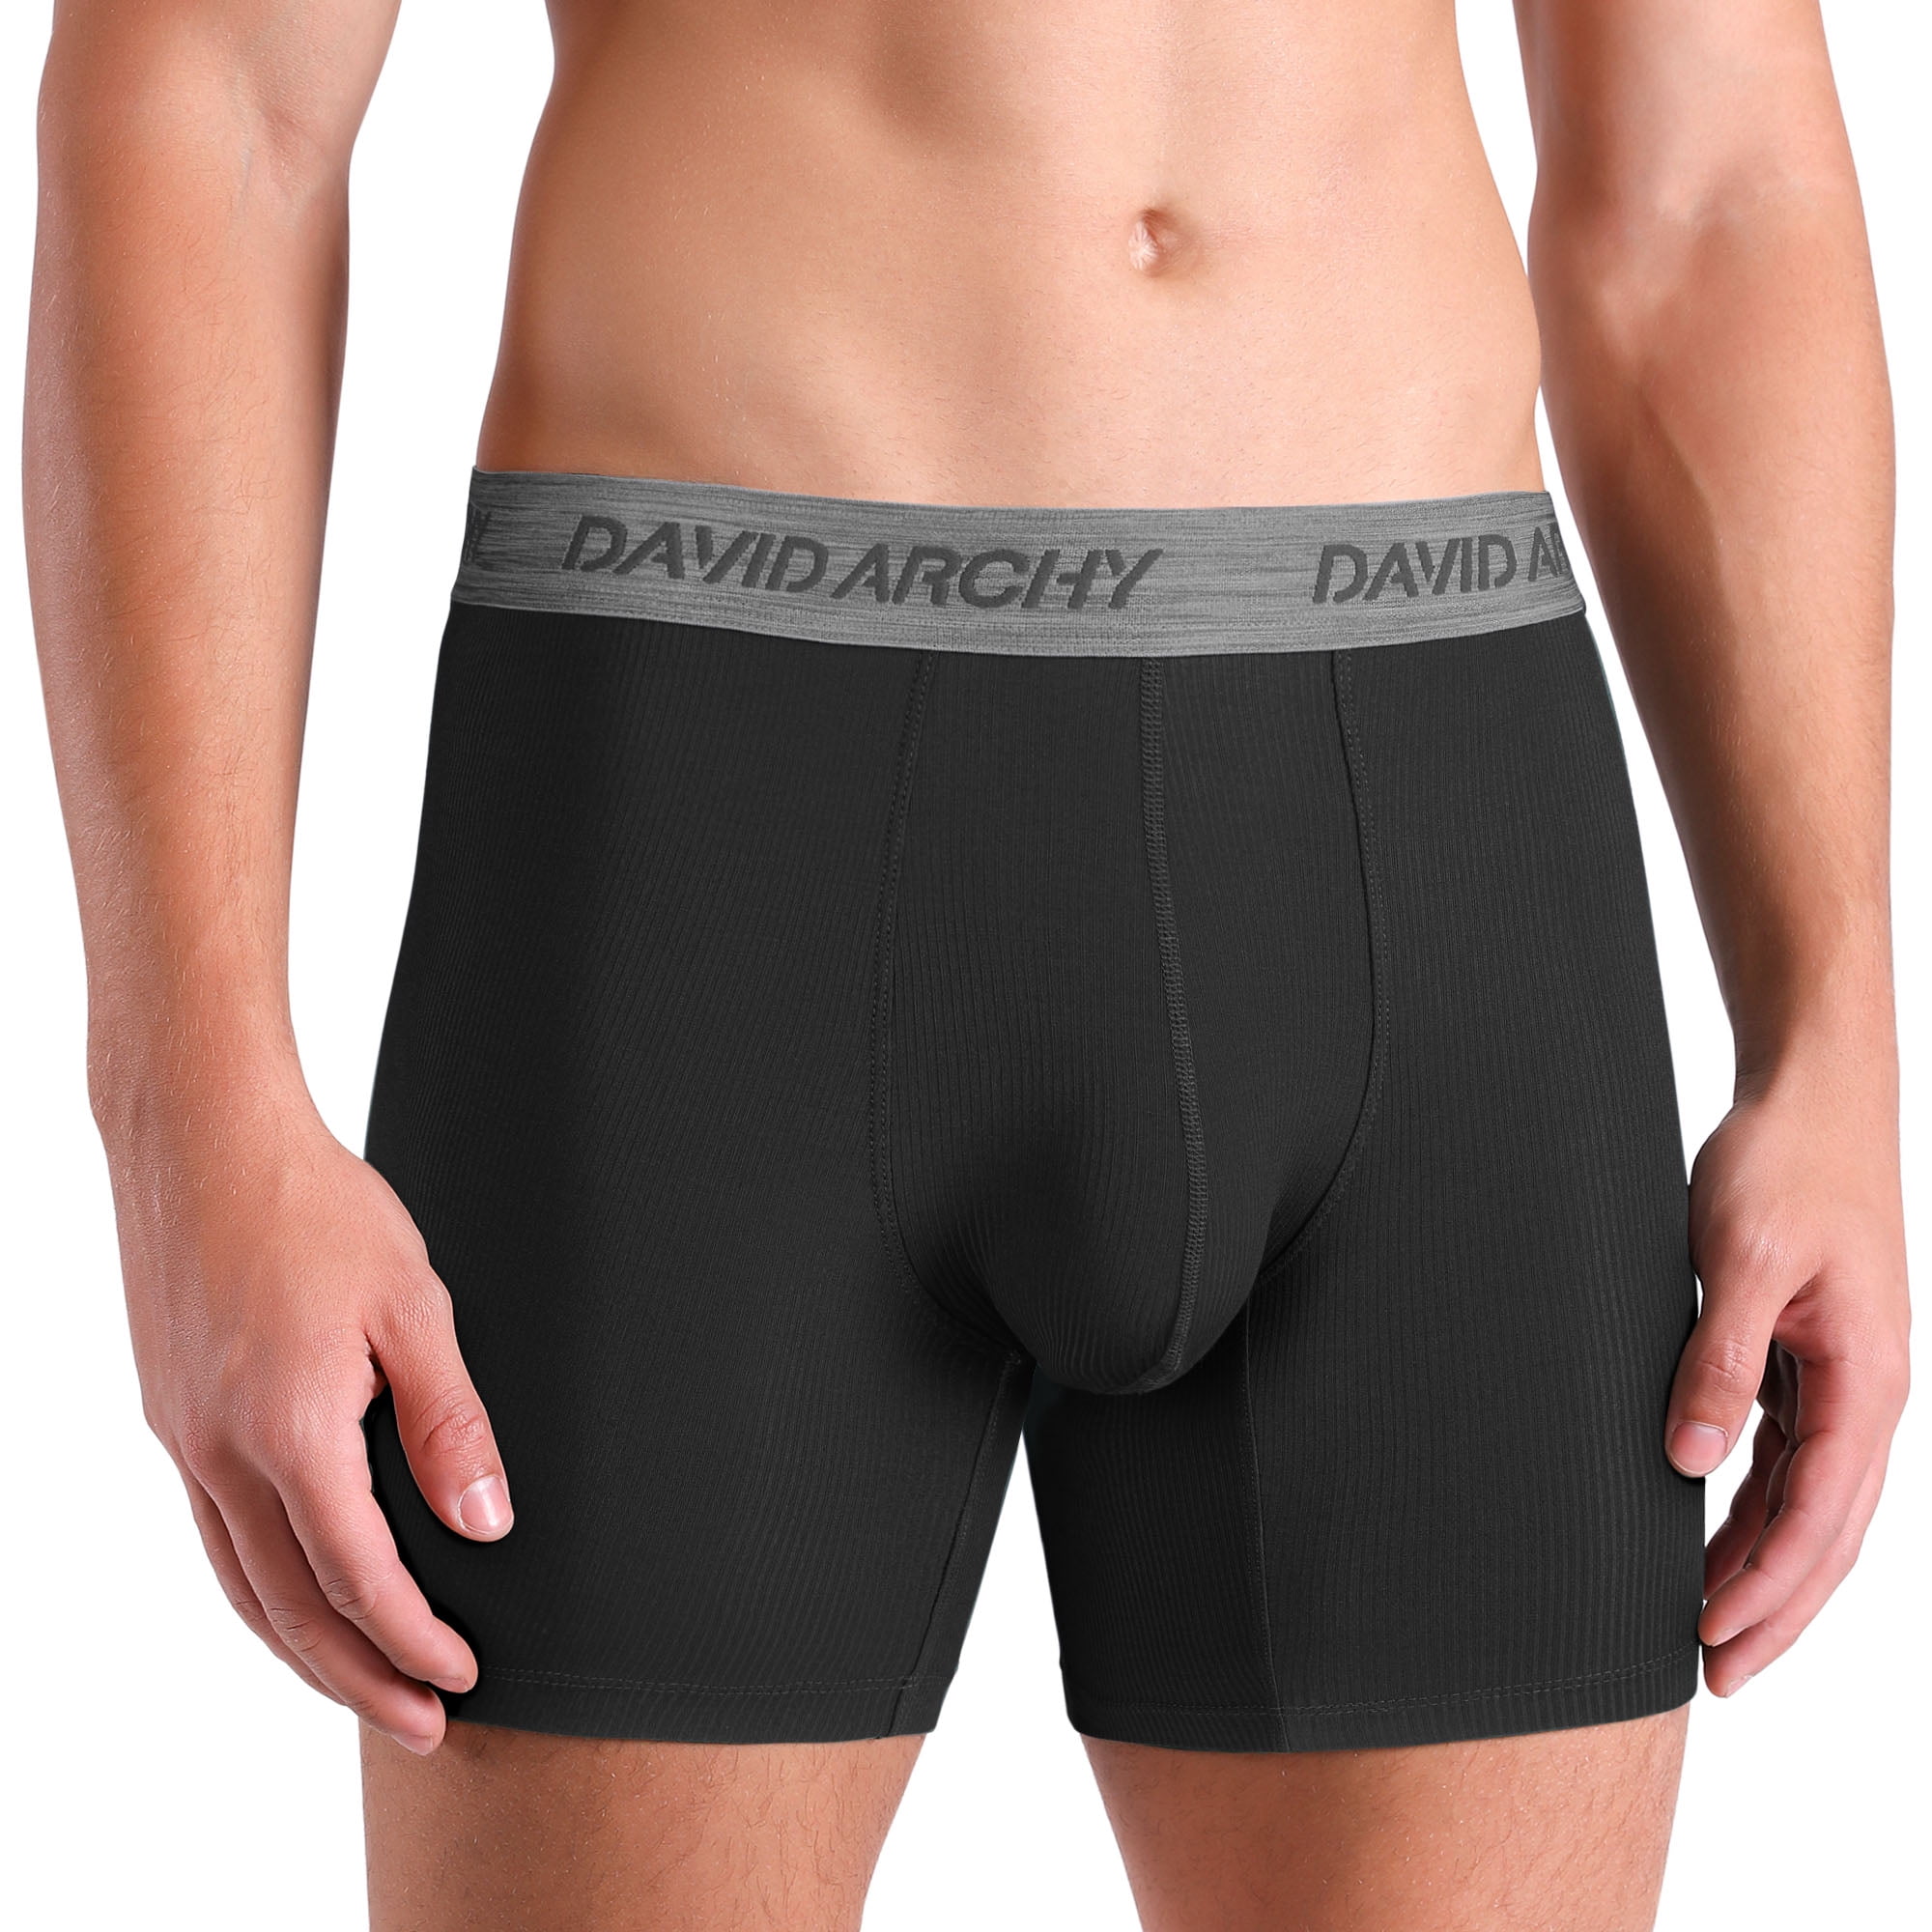 DAVID ARCHY Adult Men's Underwear Ultra Soft Micro Modal Boxer Briefs  Assorted 3 Pack,Sizes S-XL 